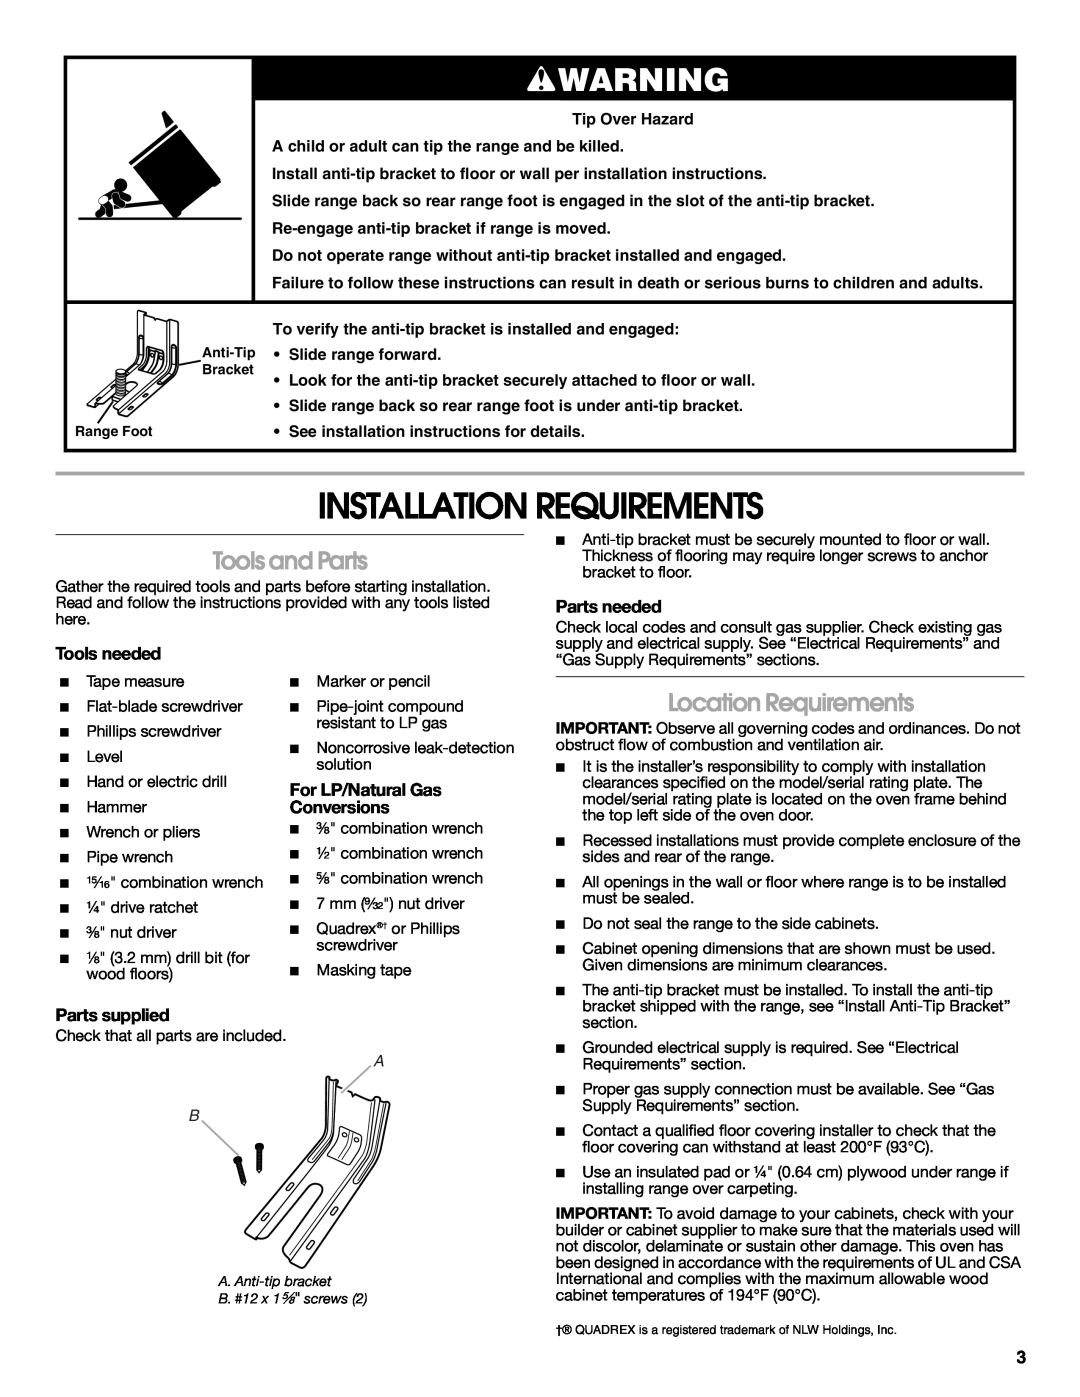 Whirlpool W10526974A Installation Requirements, Tools and Parts, Location Requirements, Parts needed, Tools needed 